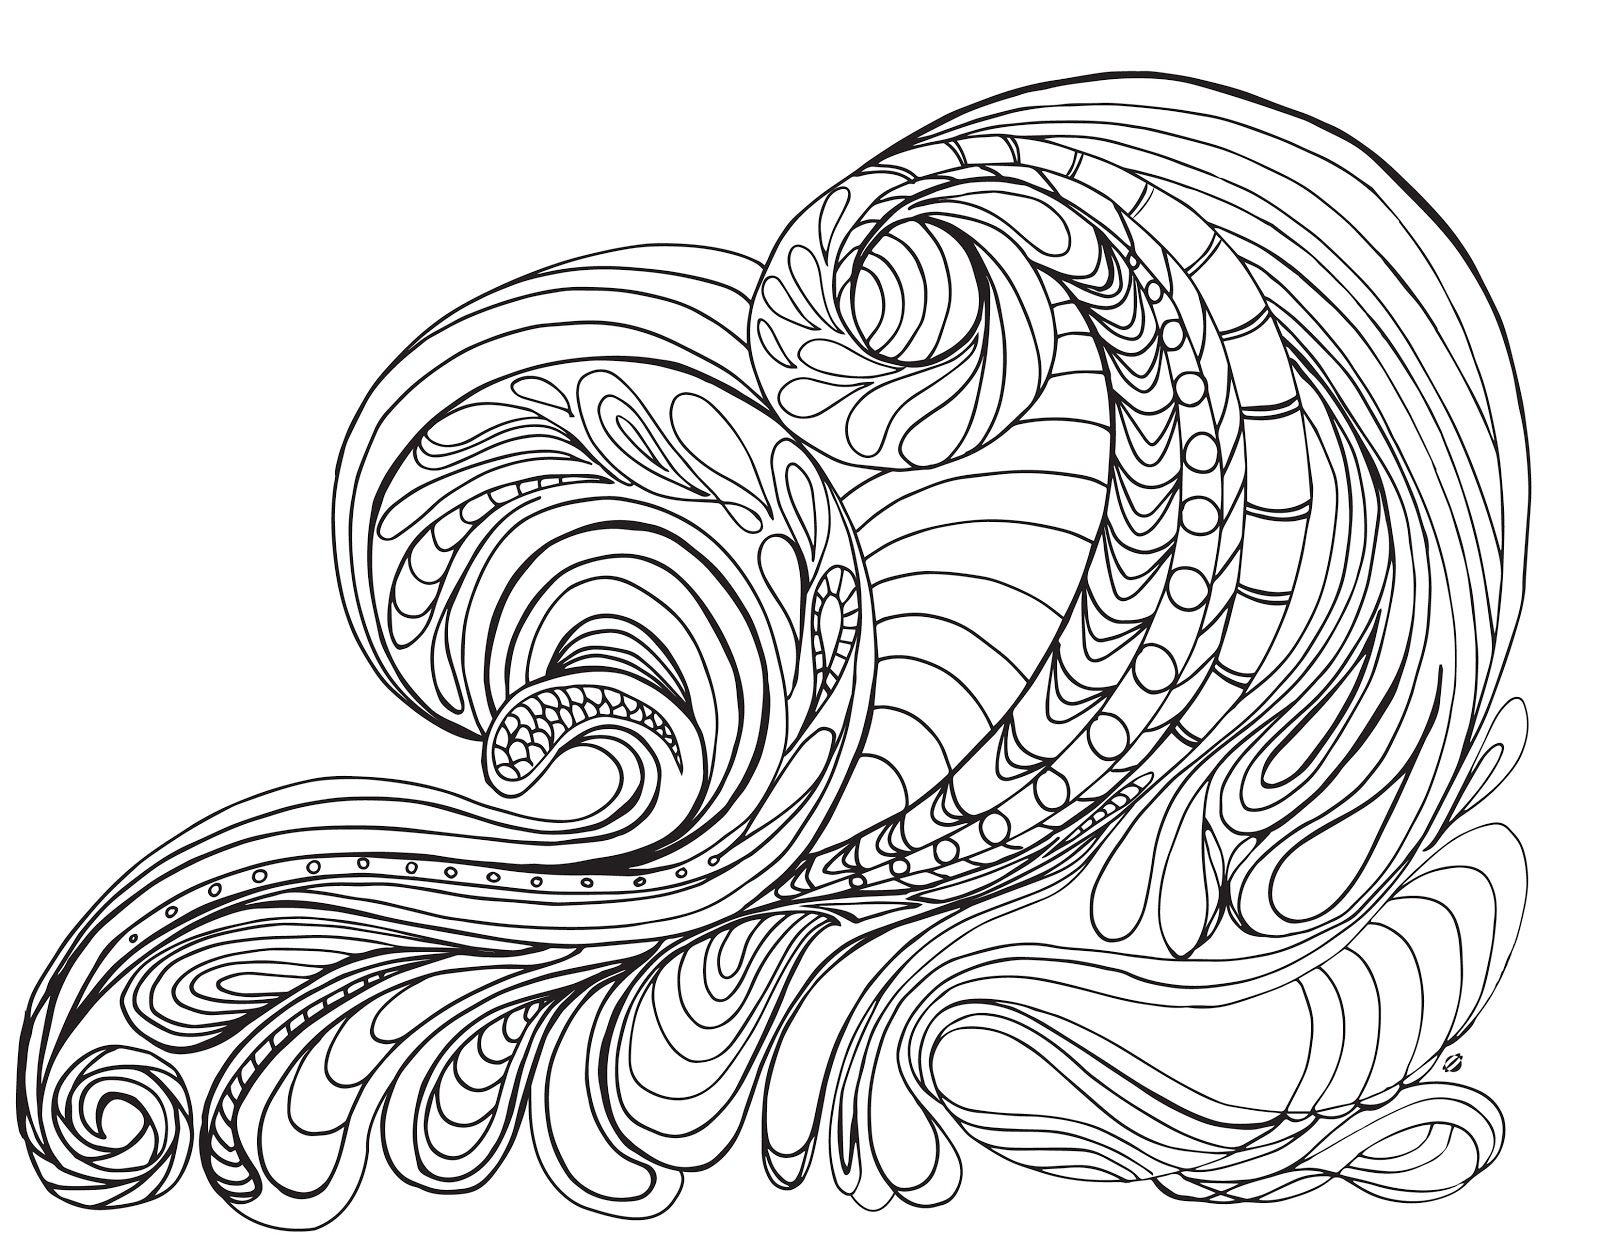 Ocean Waves Coloring Pages - Coloring Home